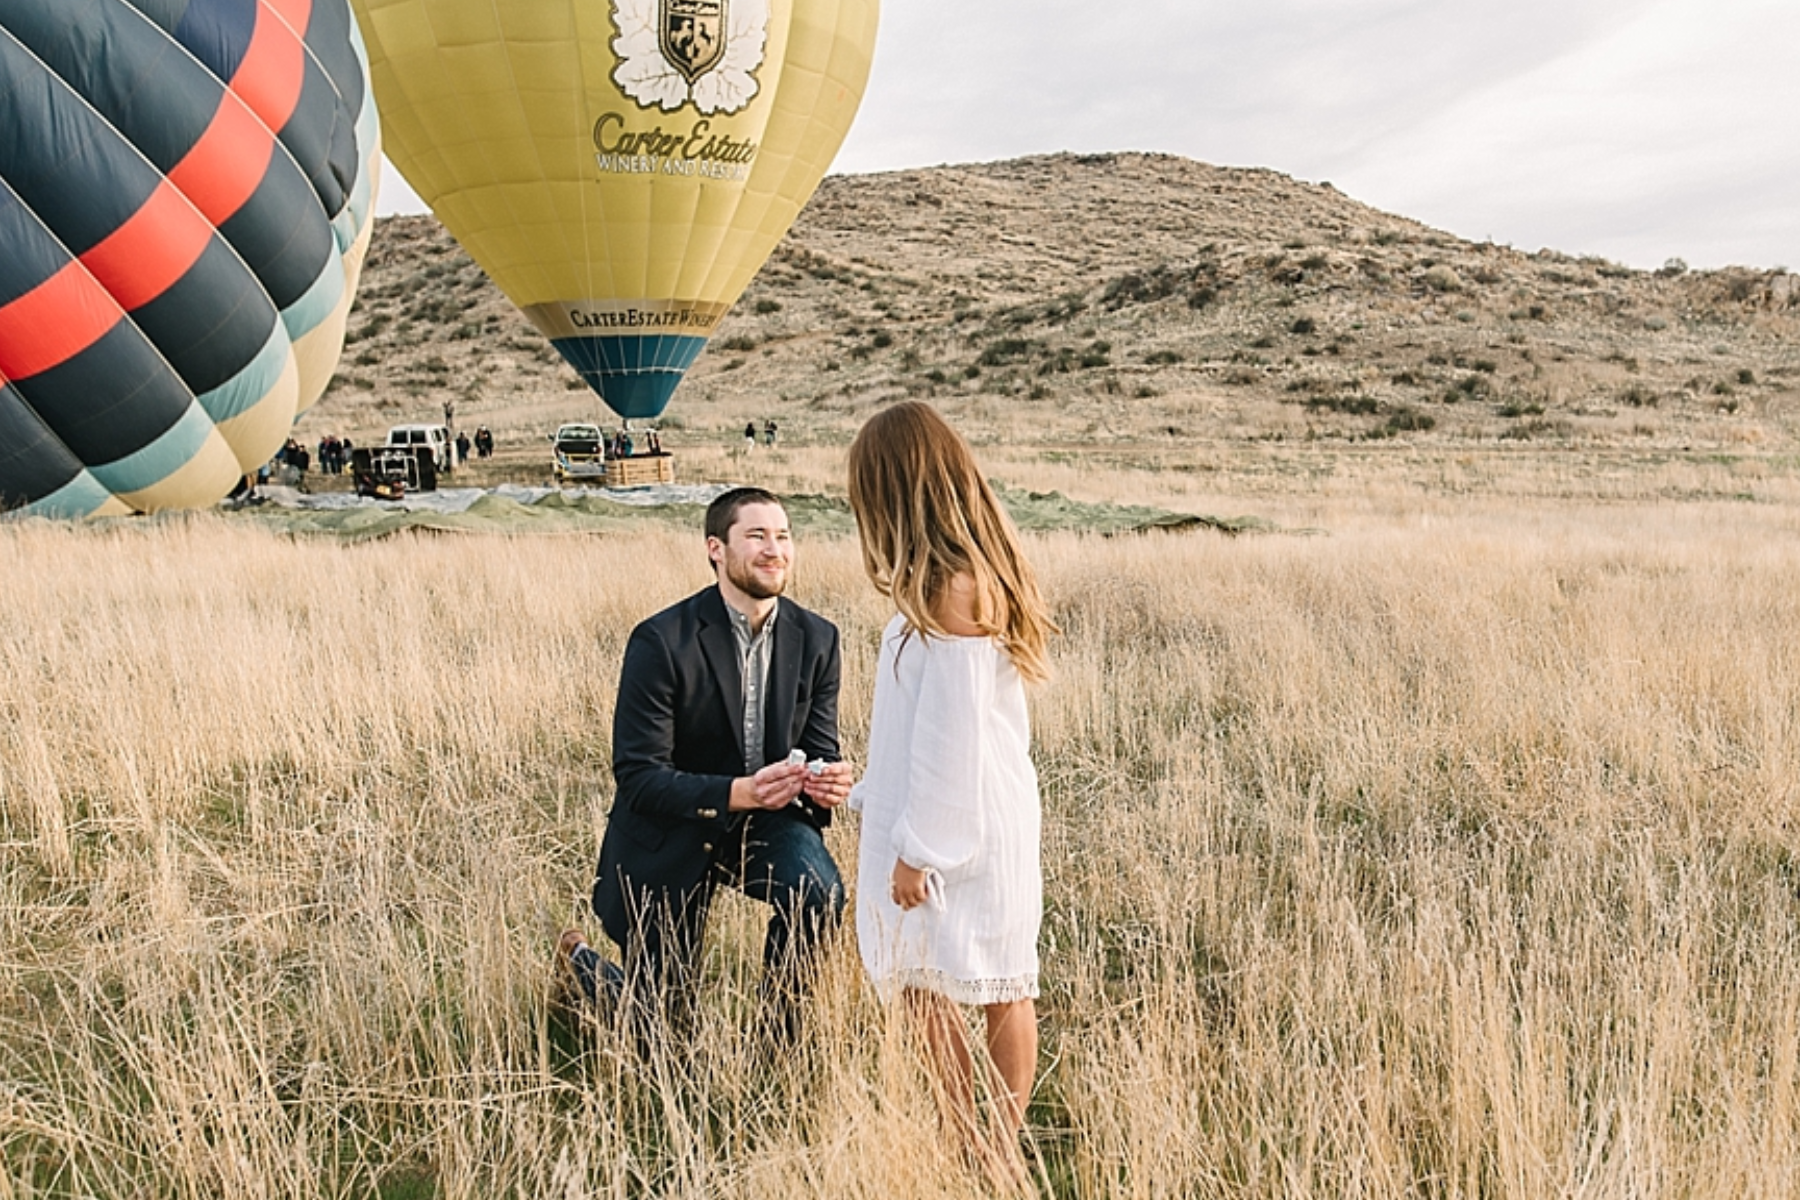 A man proposes to his partner in front of a massive hot air balloon